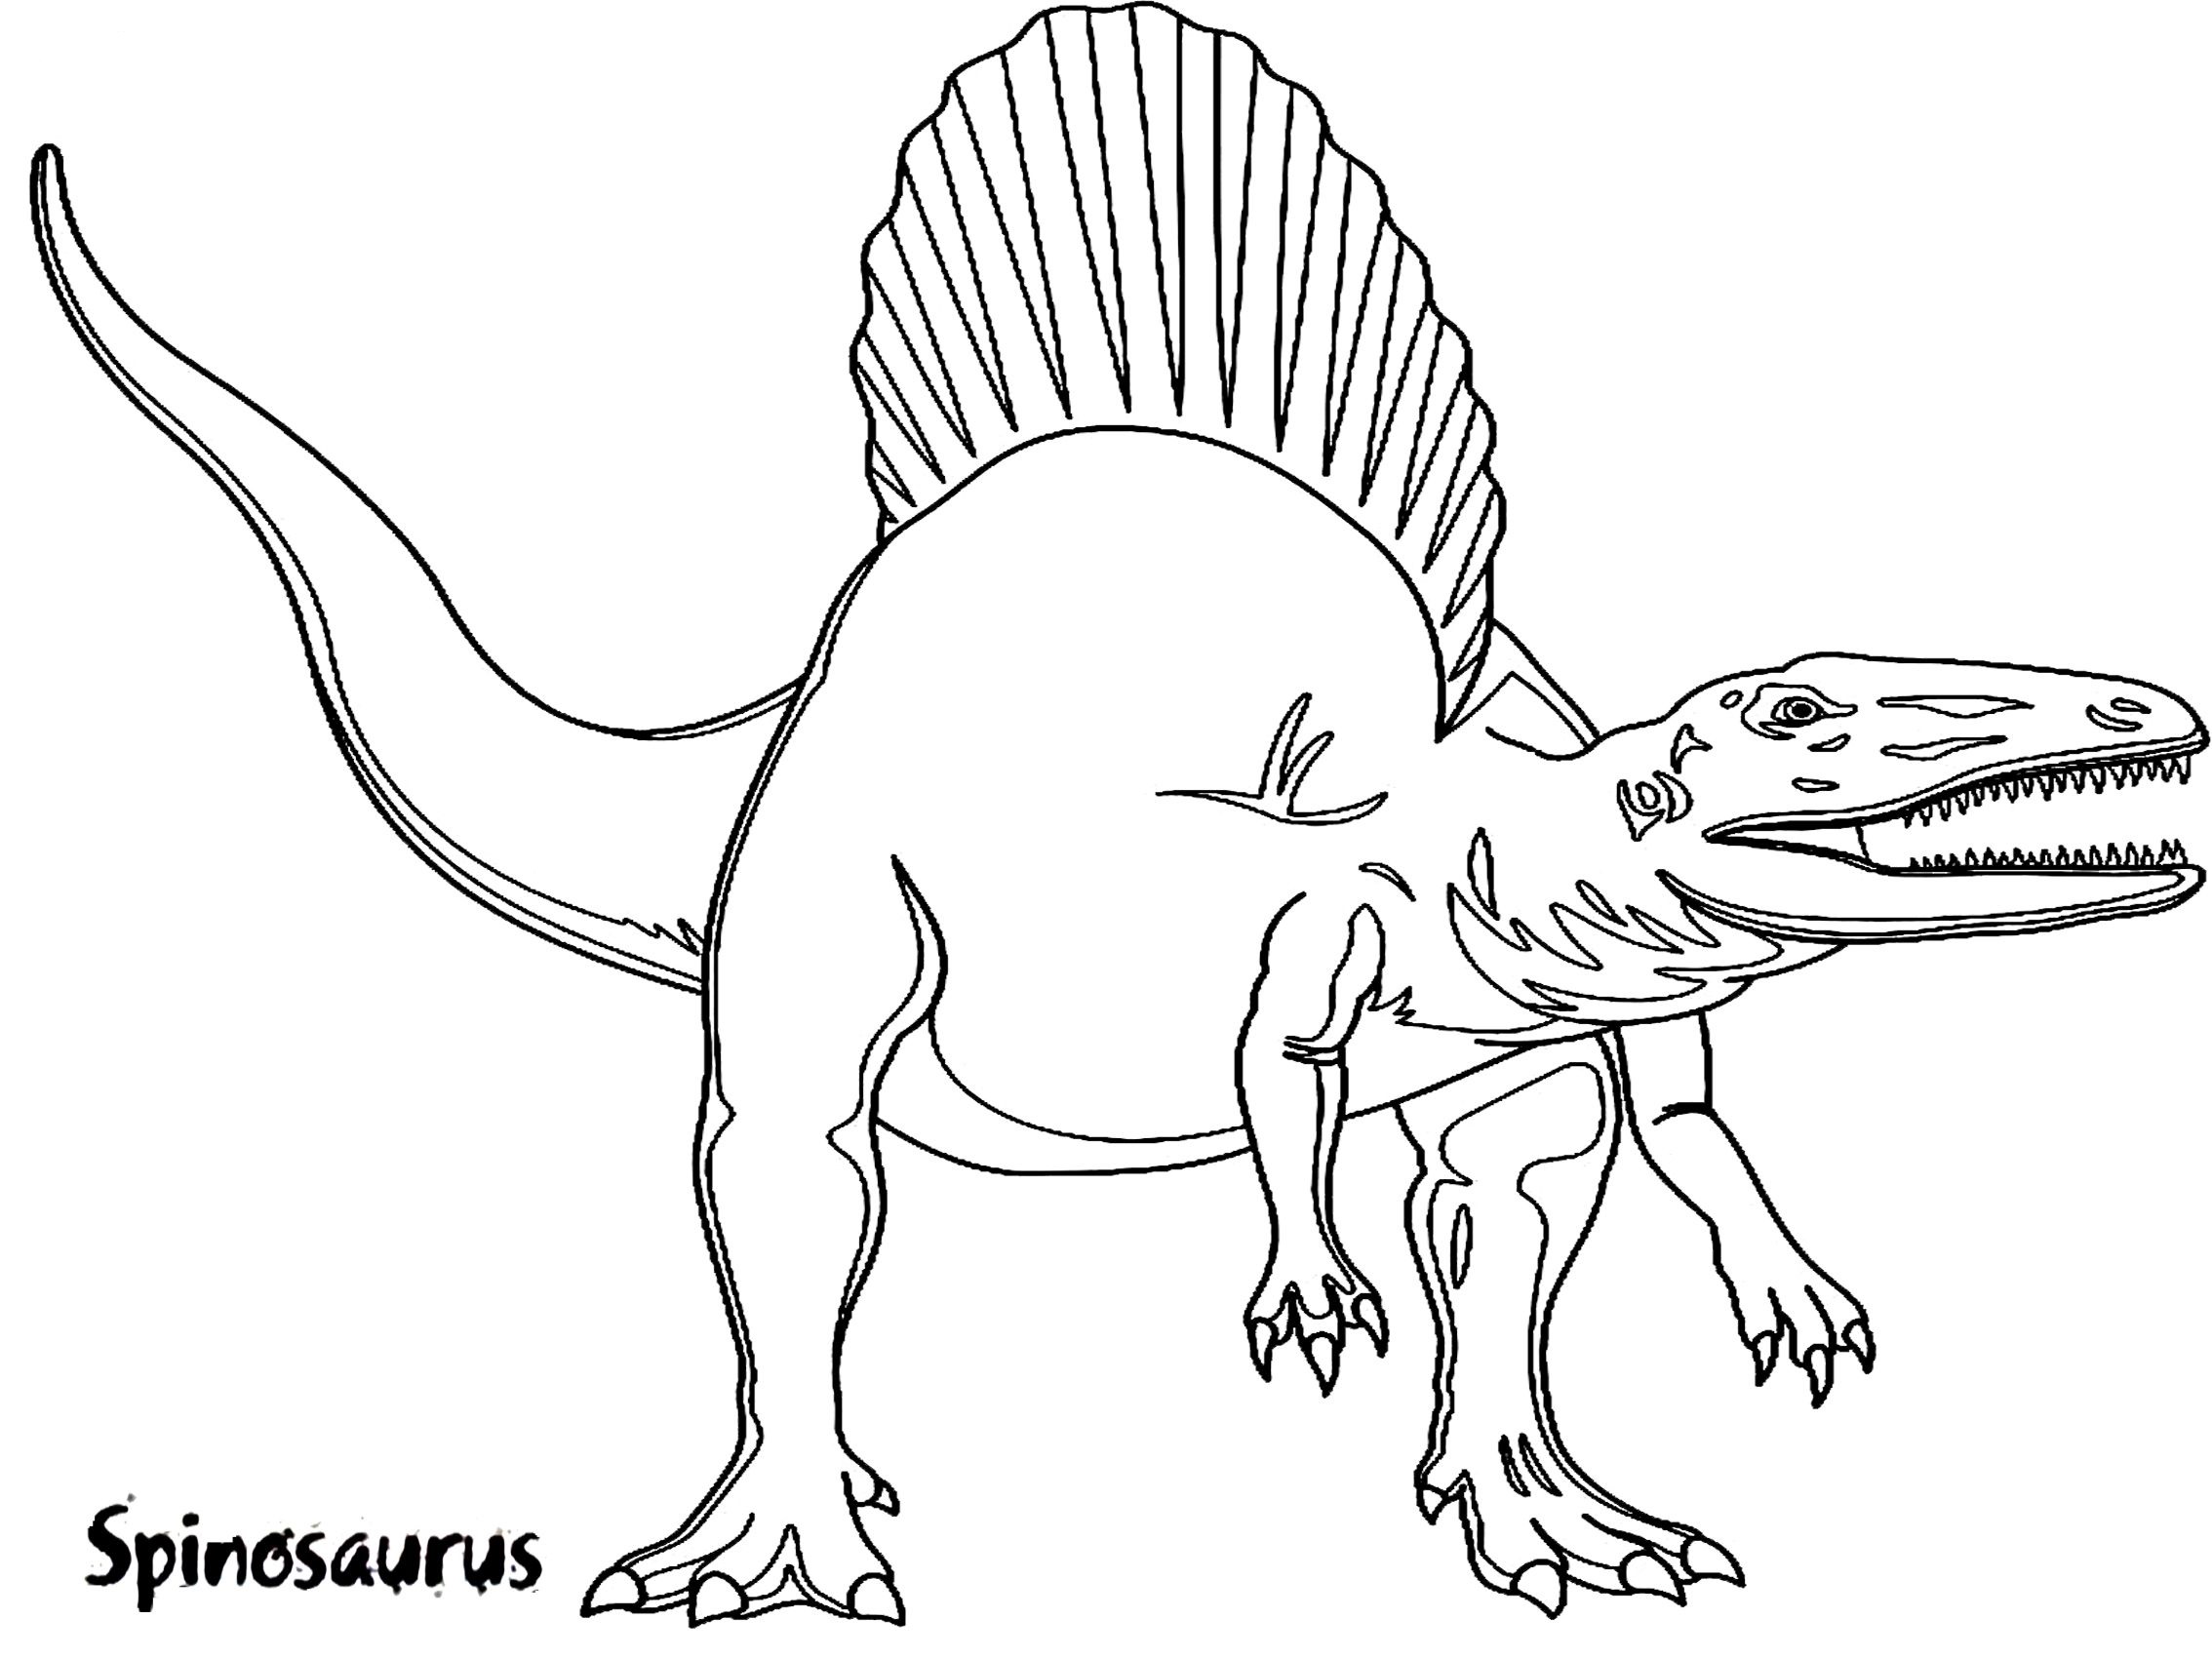 Spinosaurus coloring pages pdf to print